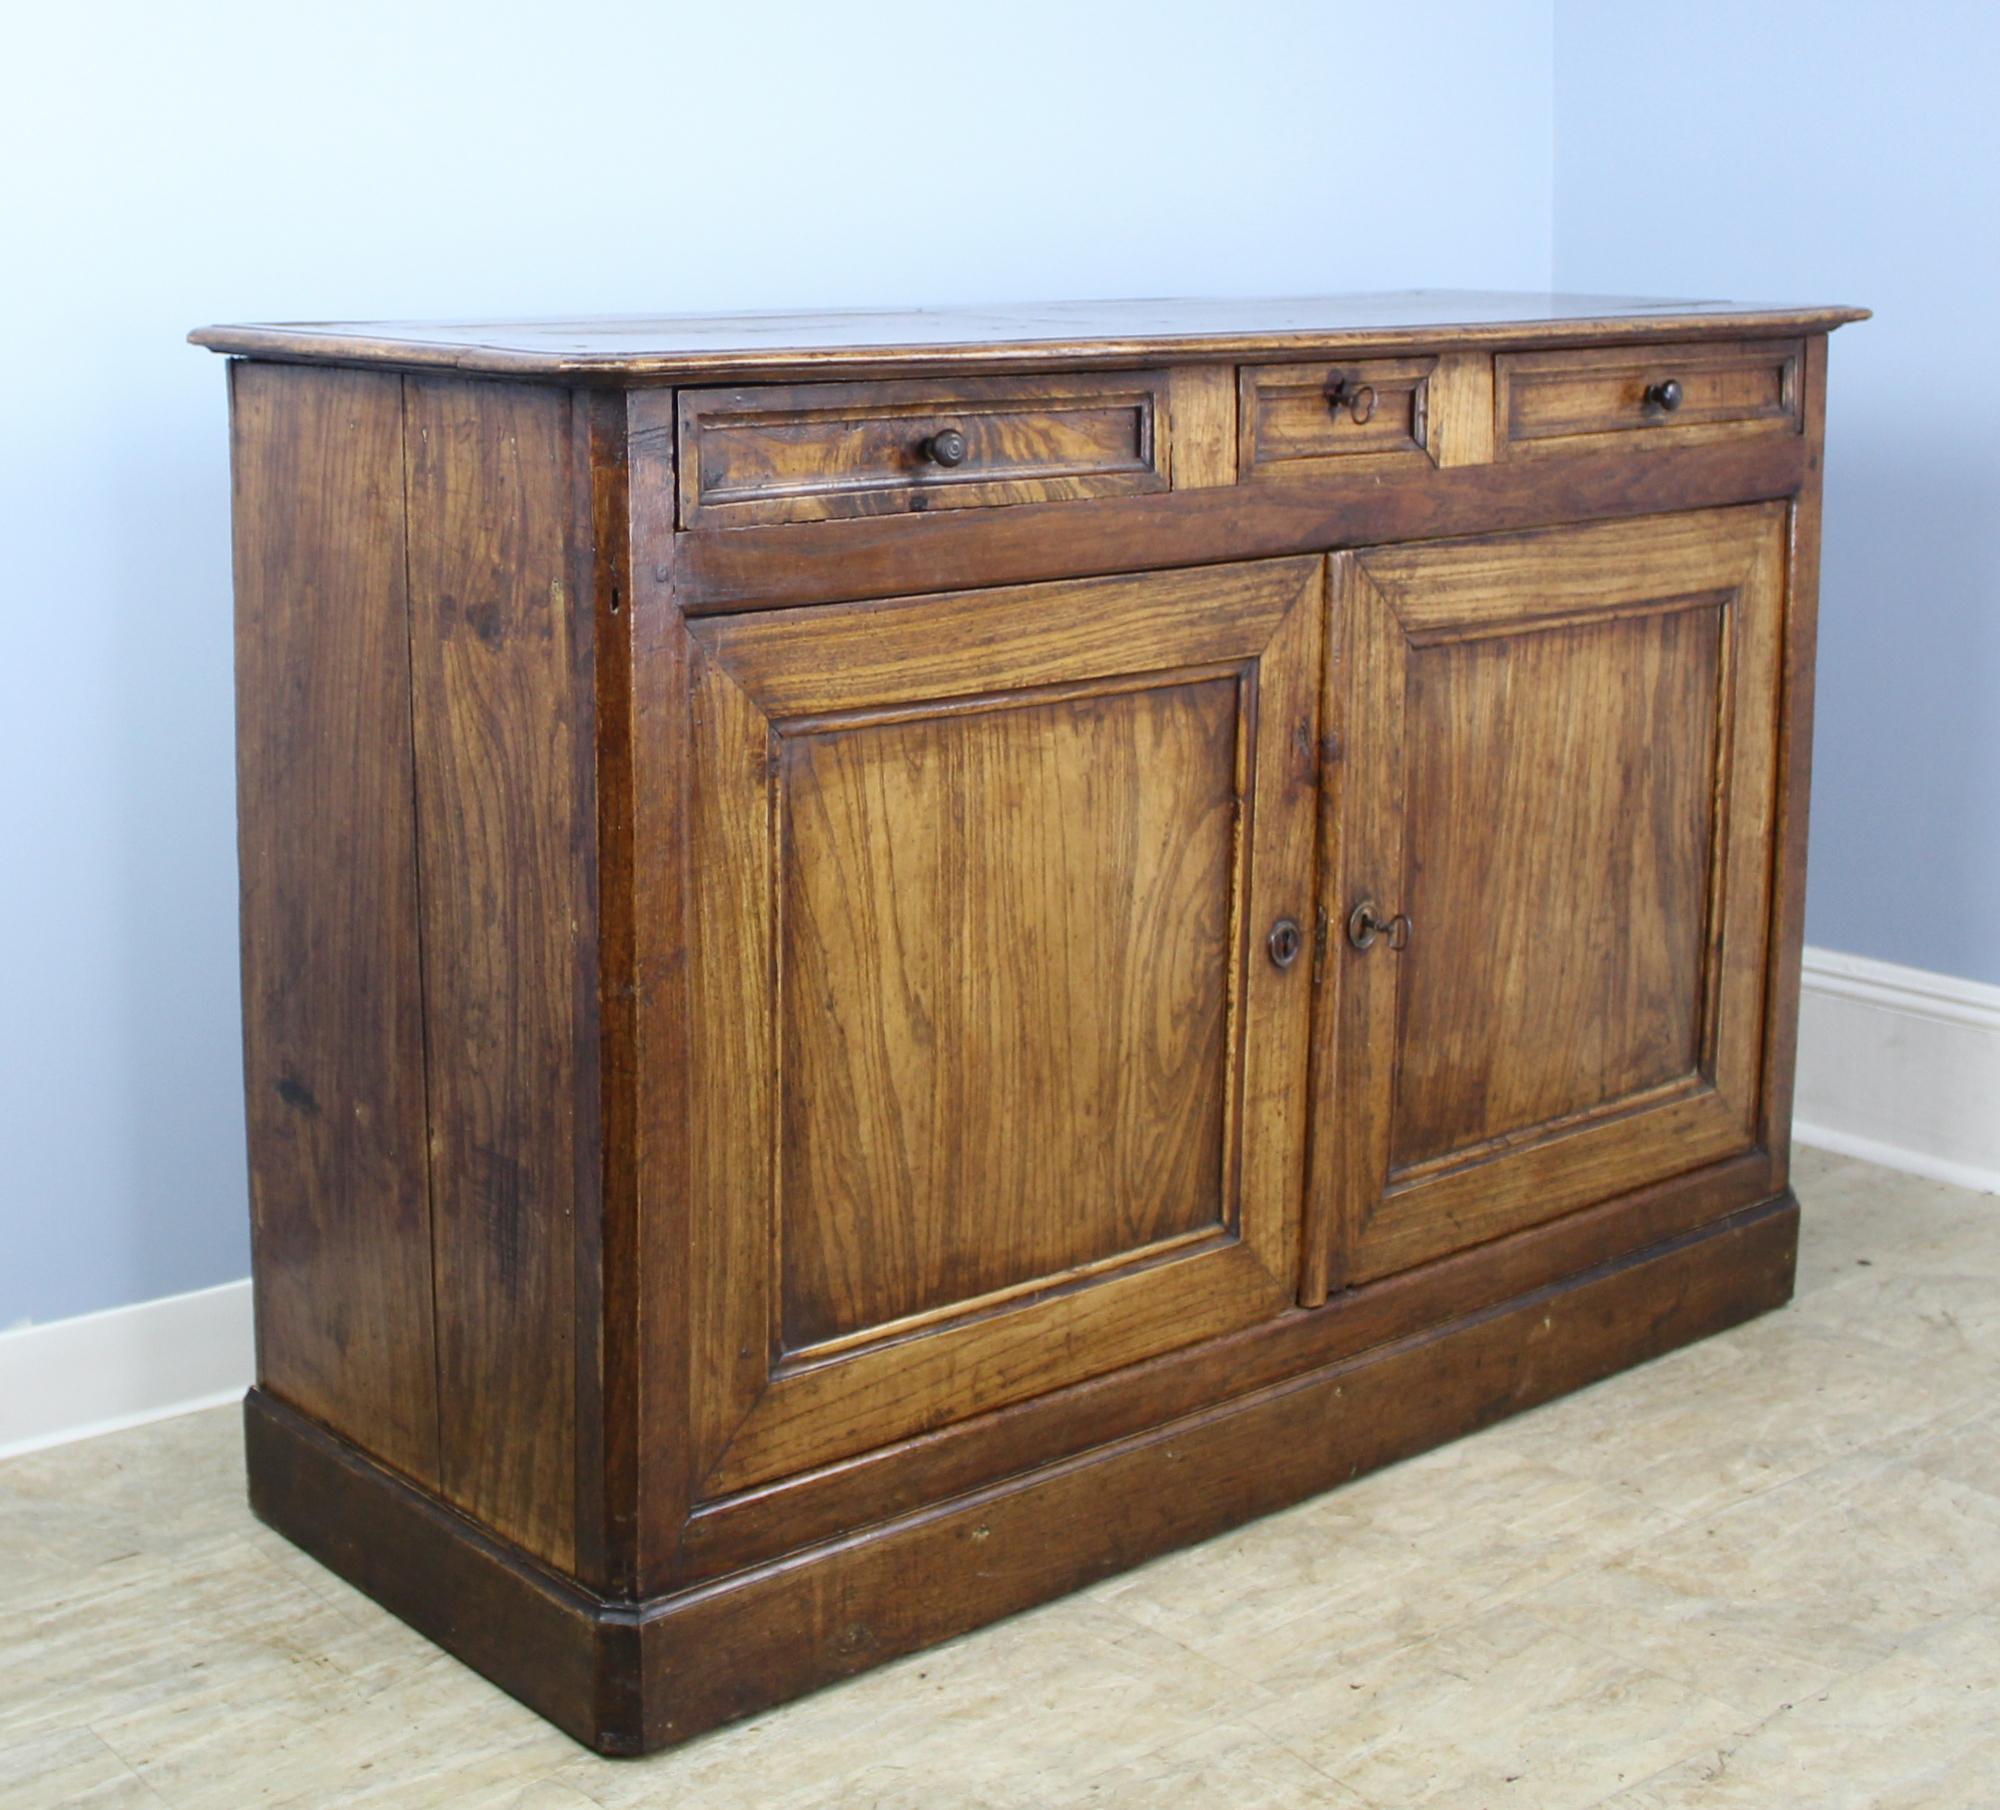 A handsome buffet in dramatically grained elm with all some Louis Philippe features, Inset panelled doors and drawers, canted corners on the top, and a simple molding at the base. The centre drawers has a sweet inlaid heart around. The keyhole.